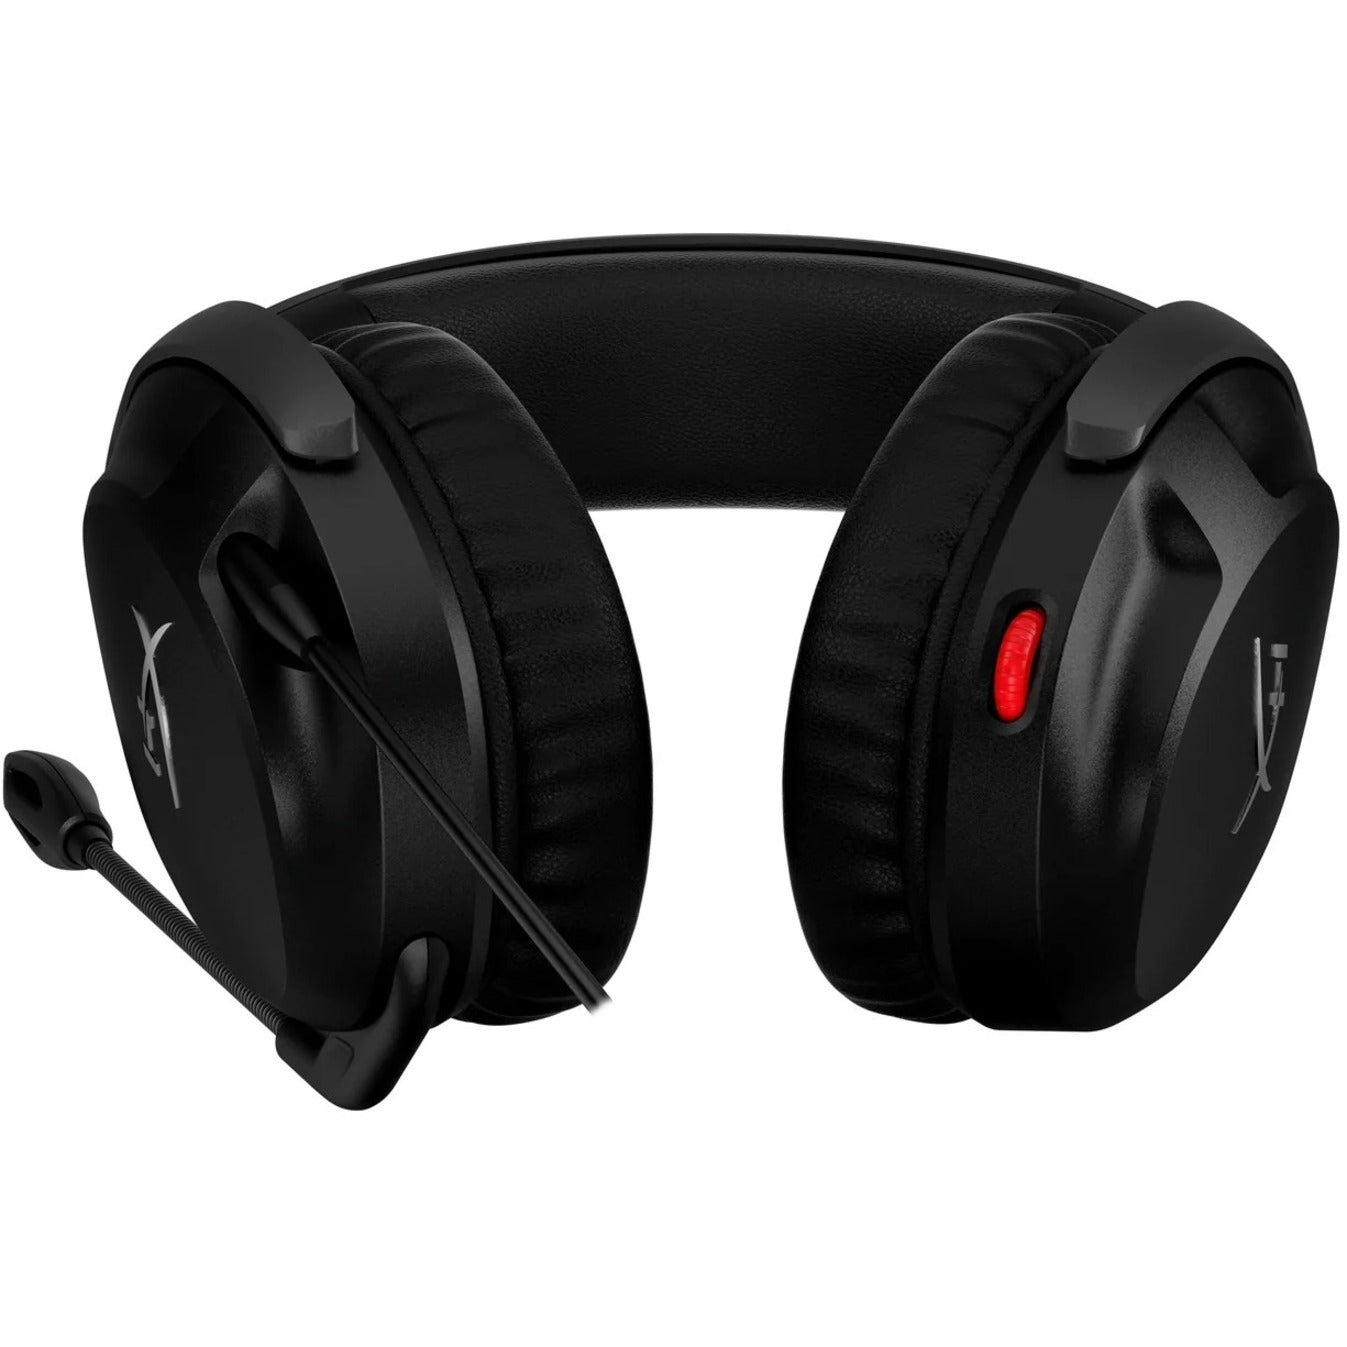 HyperX 519T1AA Cloud Stinger 2 Gaming Headset, DTS Headphone:X, Rotating Ear Cup, Flip to Mute